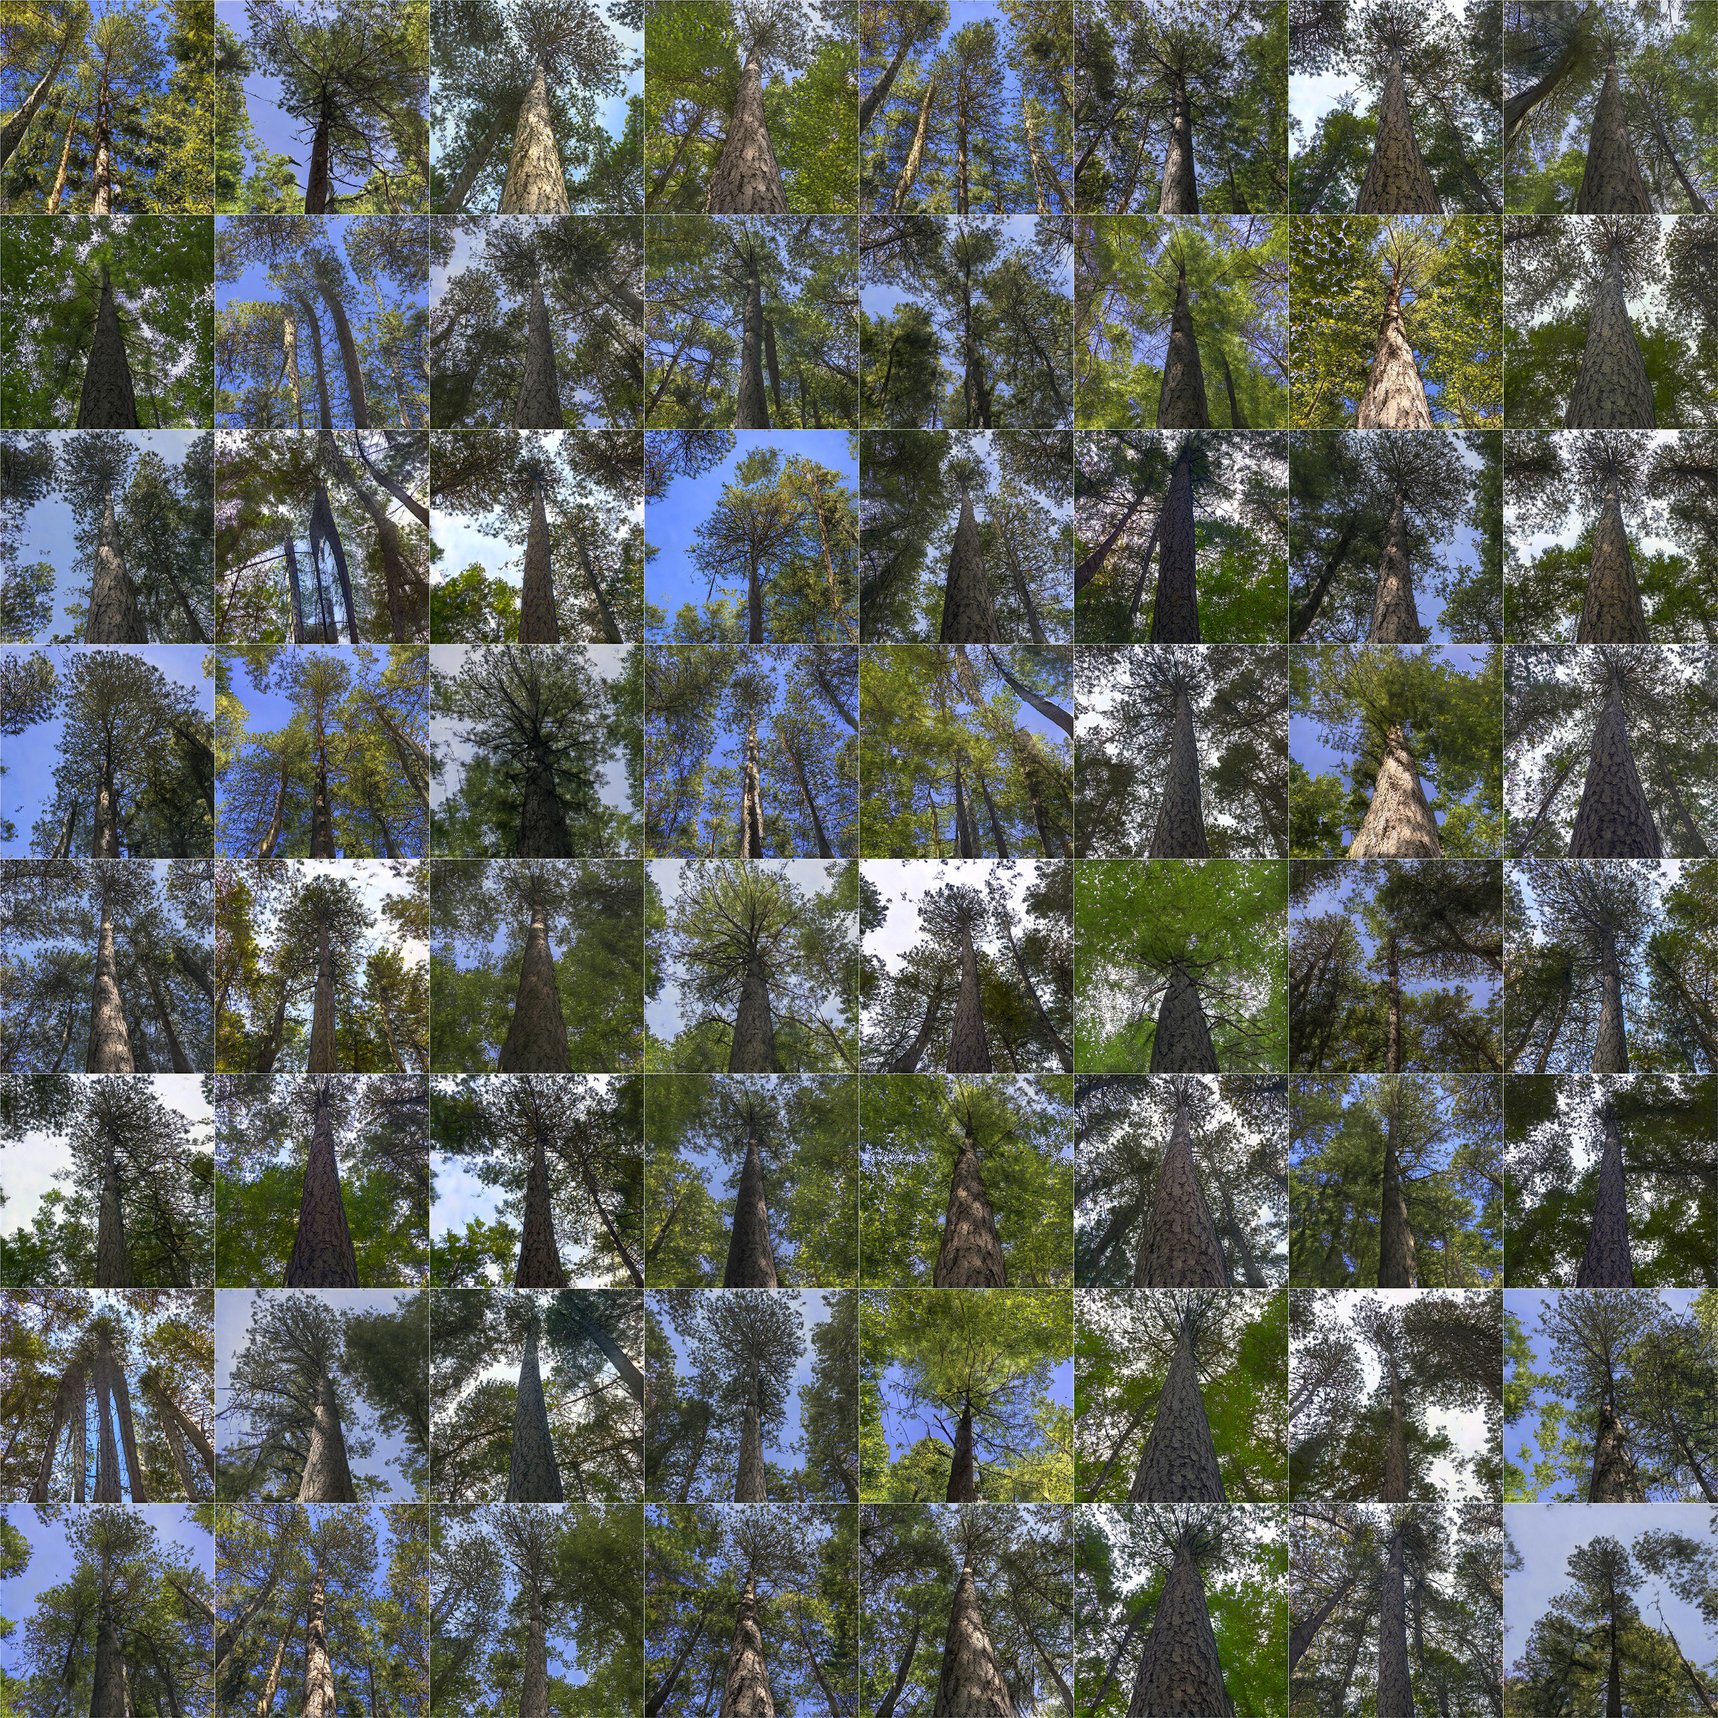 Grid of many photos of pine trees, with blue and gray skies.